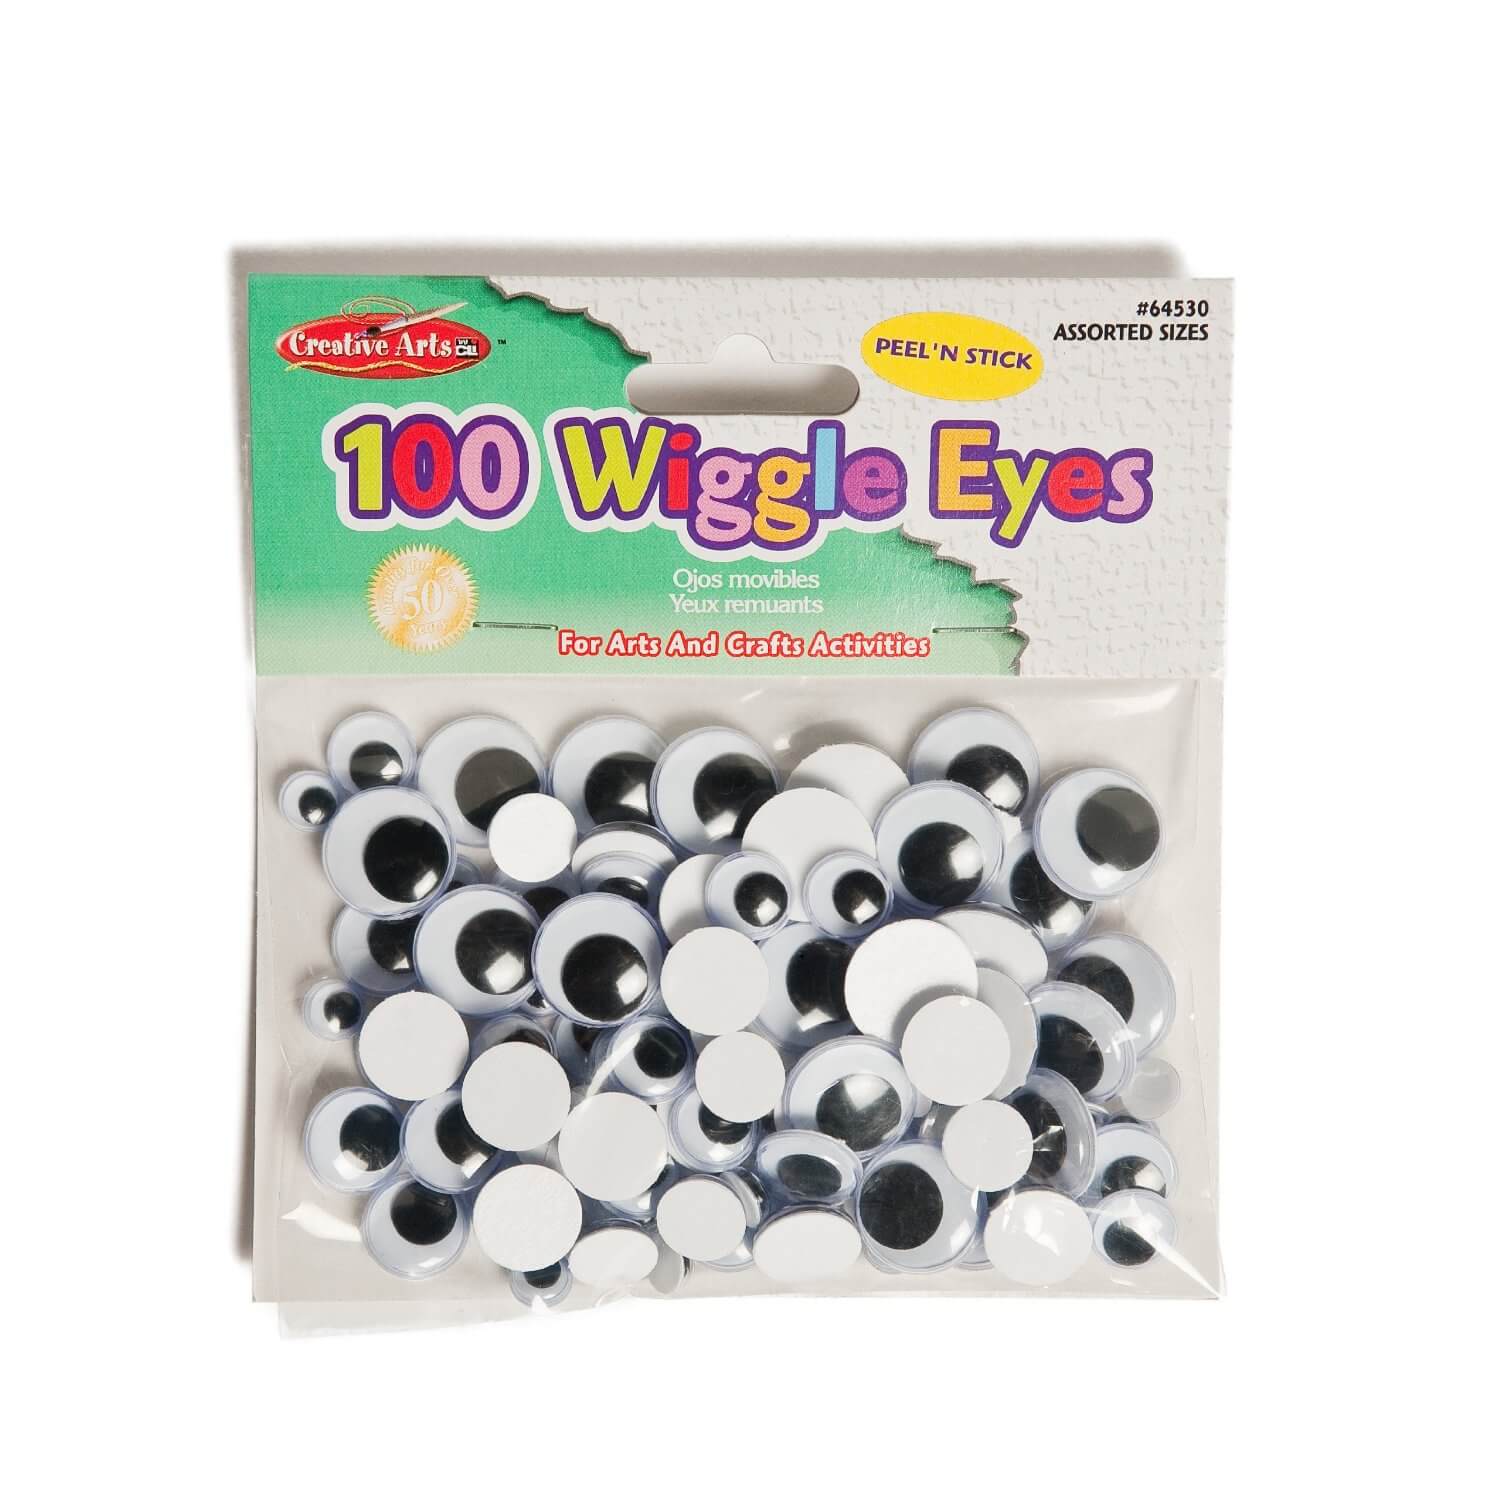 googly eyes for crafts